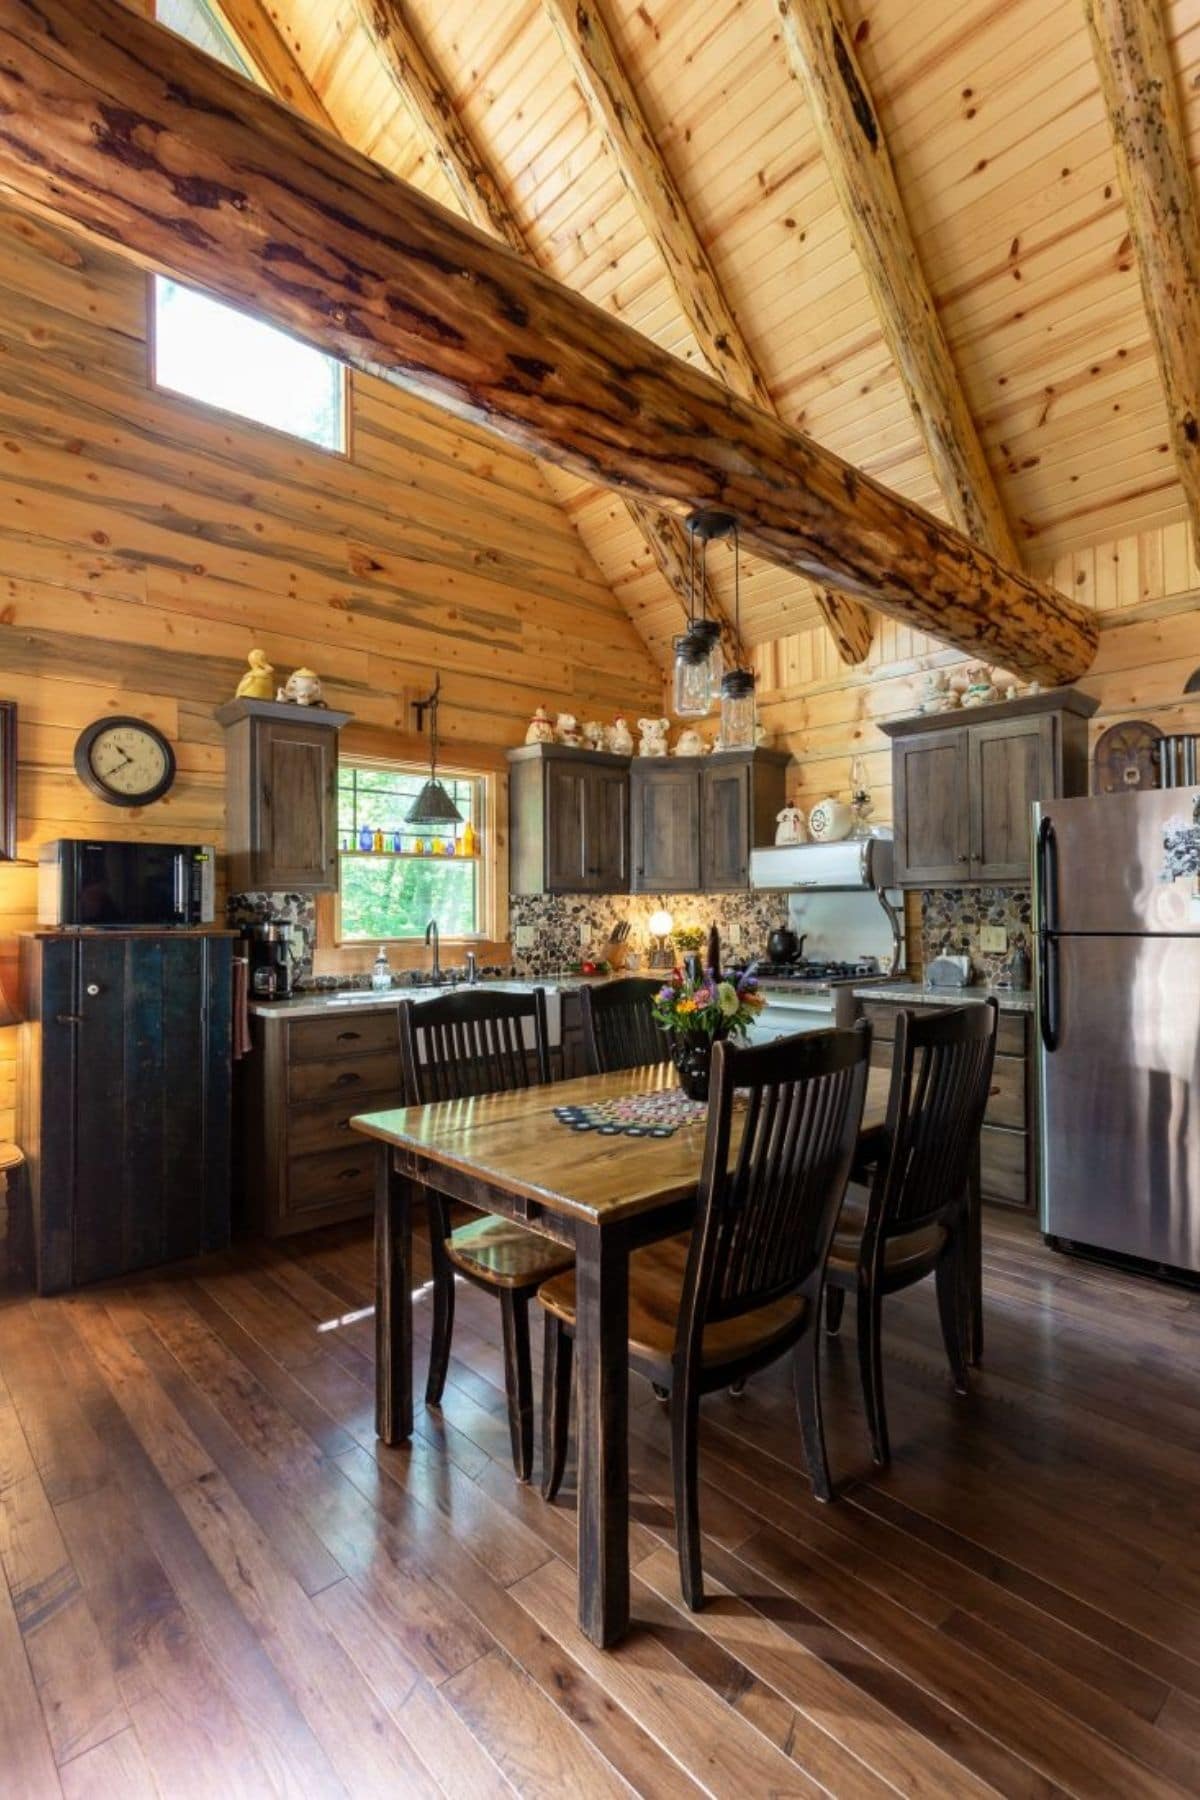 view into kitchen of log home with refrigerator on right and table in foreground